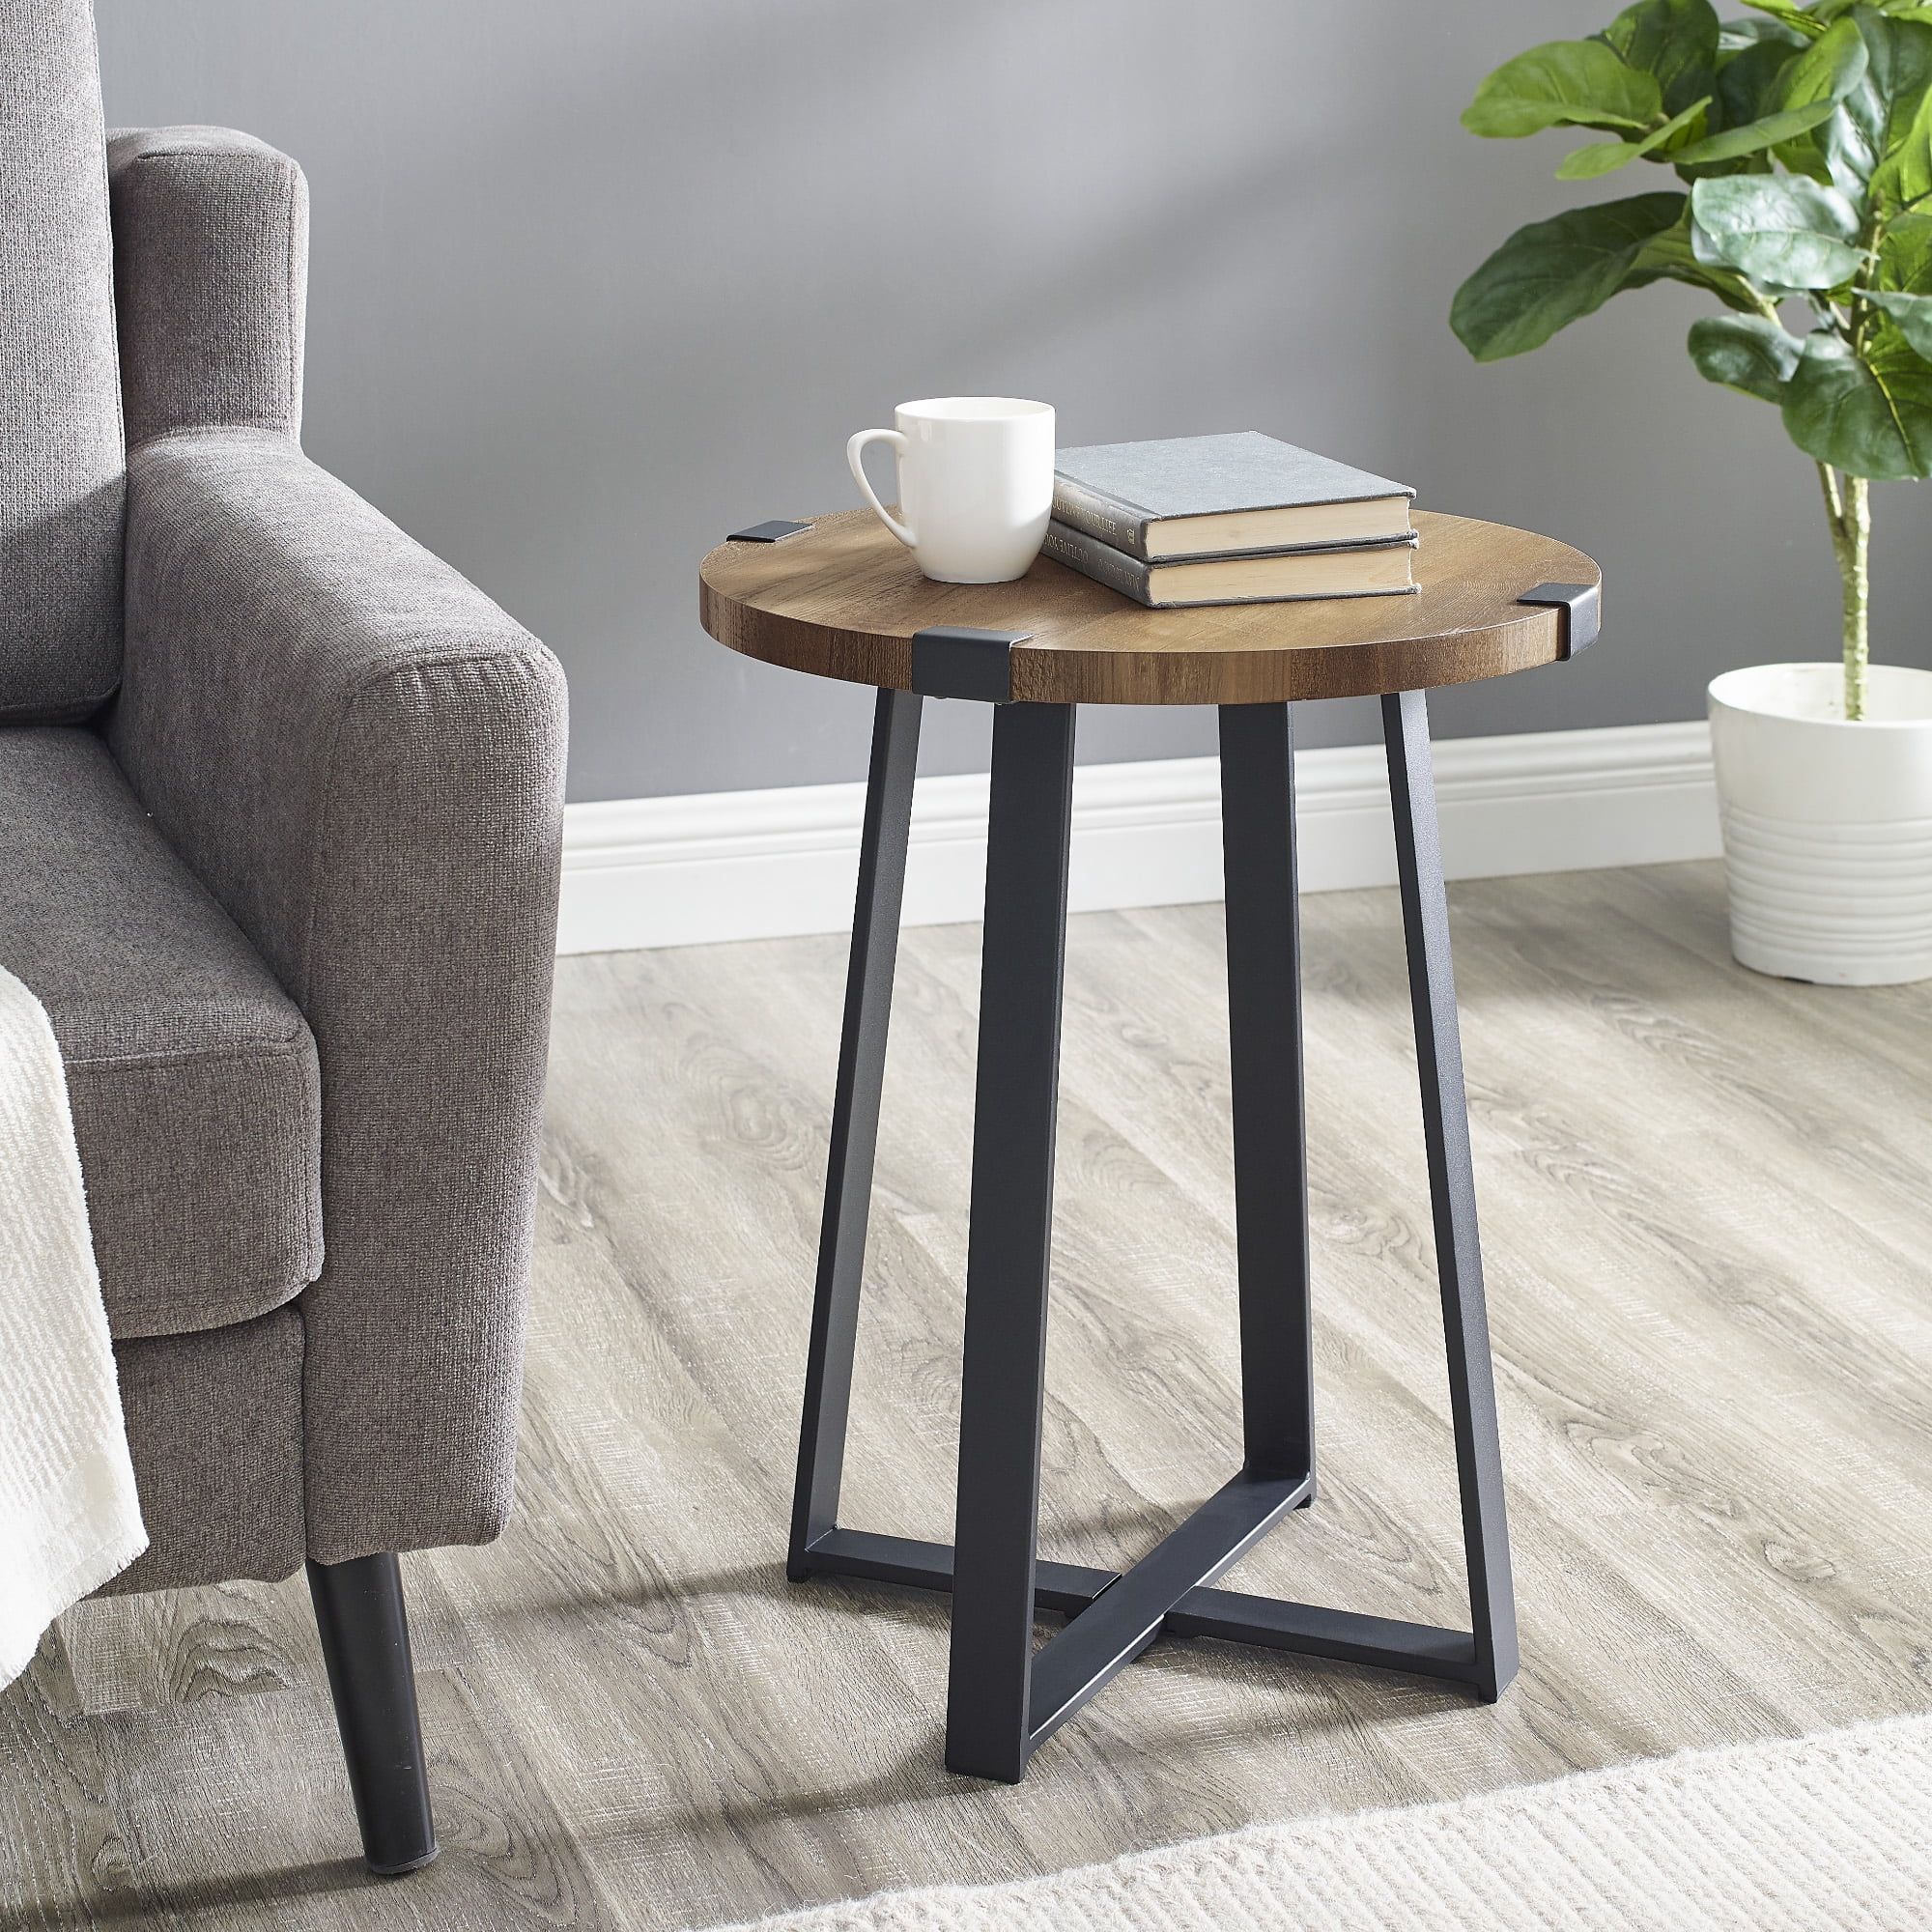 Woven Paths Rustic Wood and Metal Round End Table, Reclaimed Barnwood | Walmart (US)